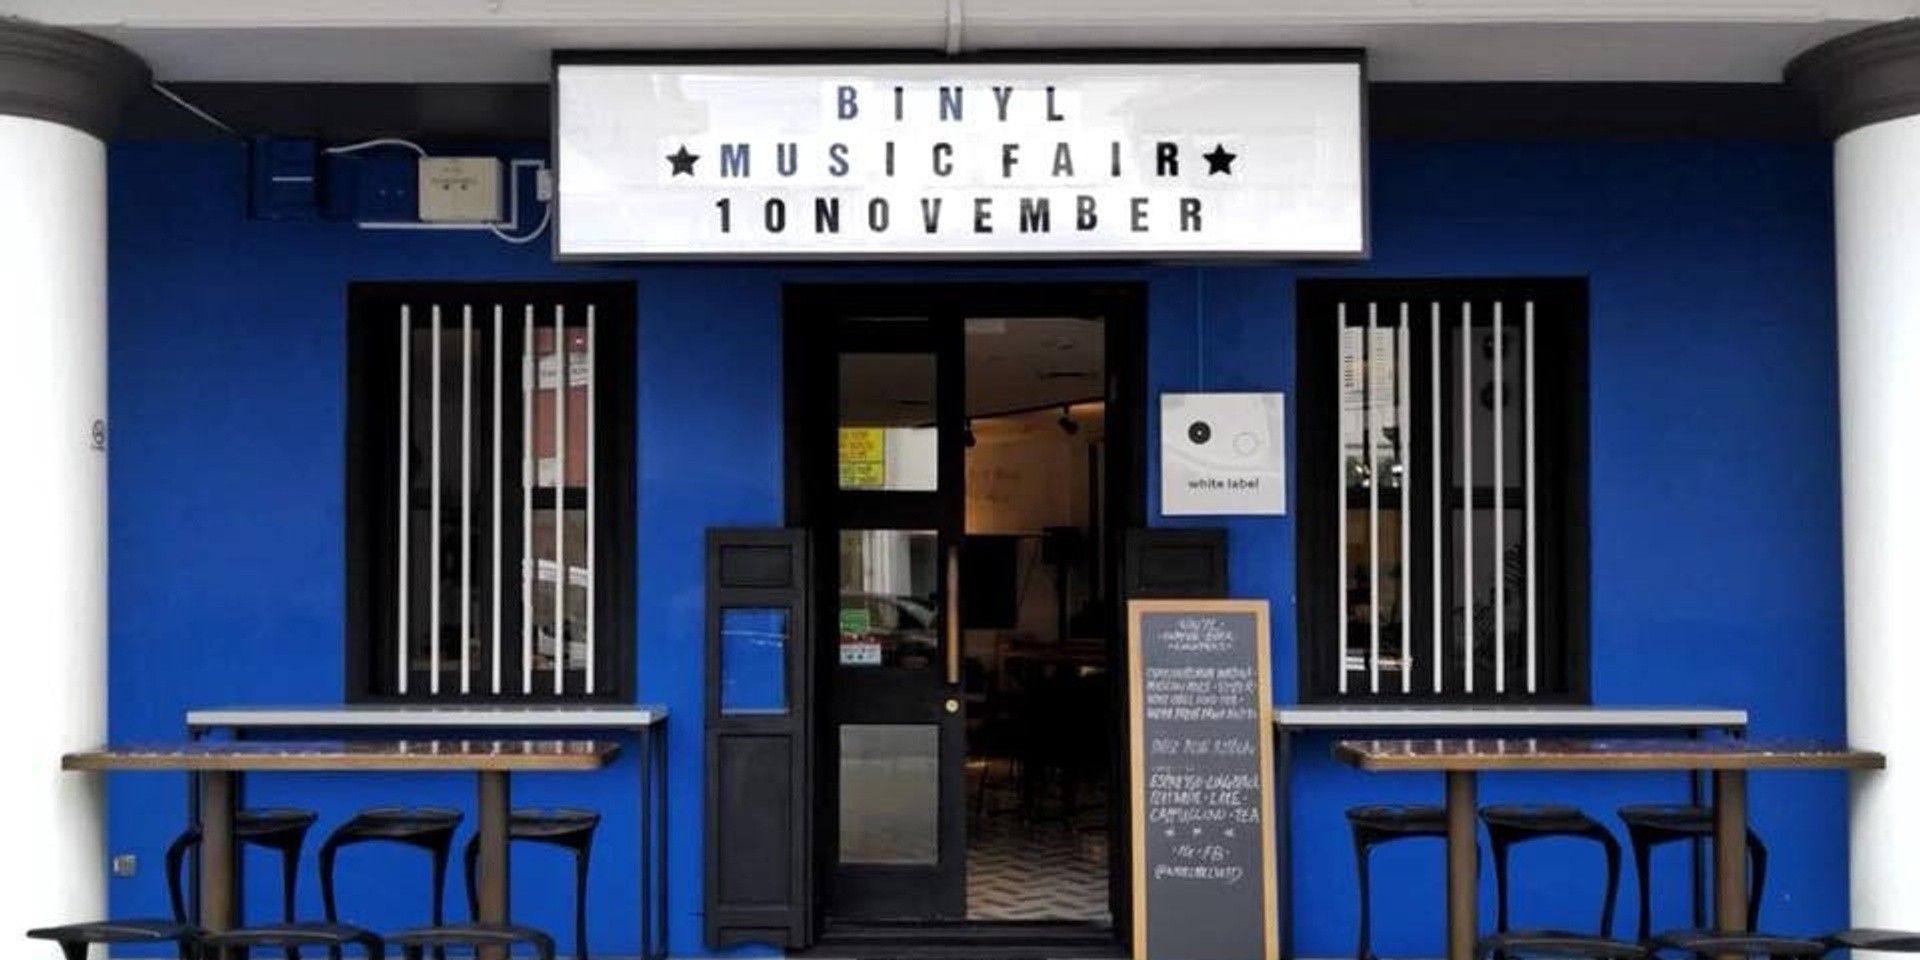 Visit White Label Records this weekend for new vinyl records at the latest edition of BINYL 